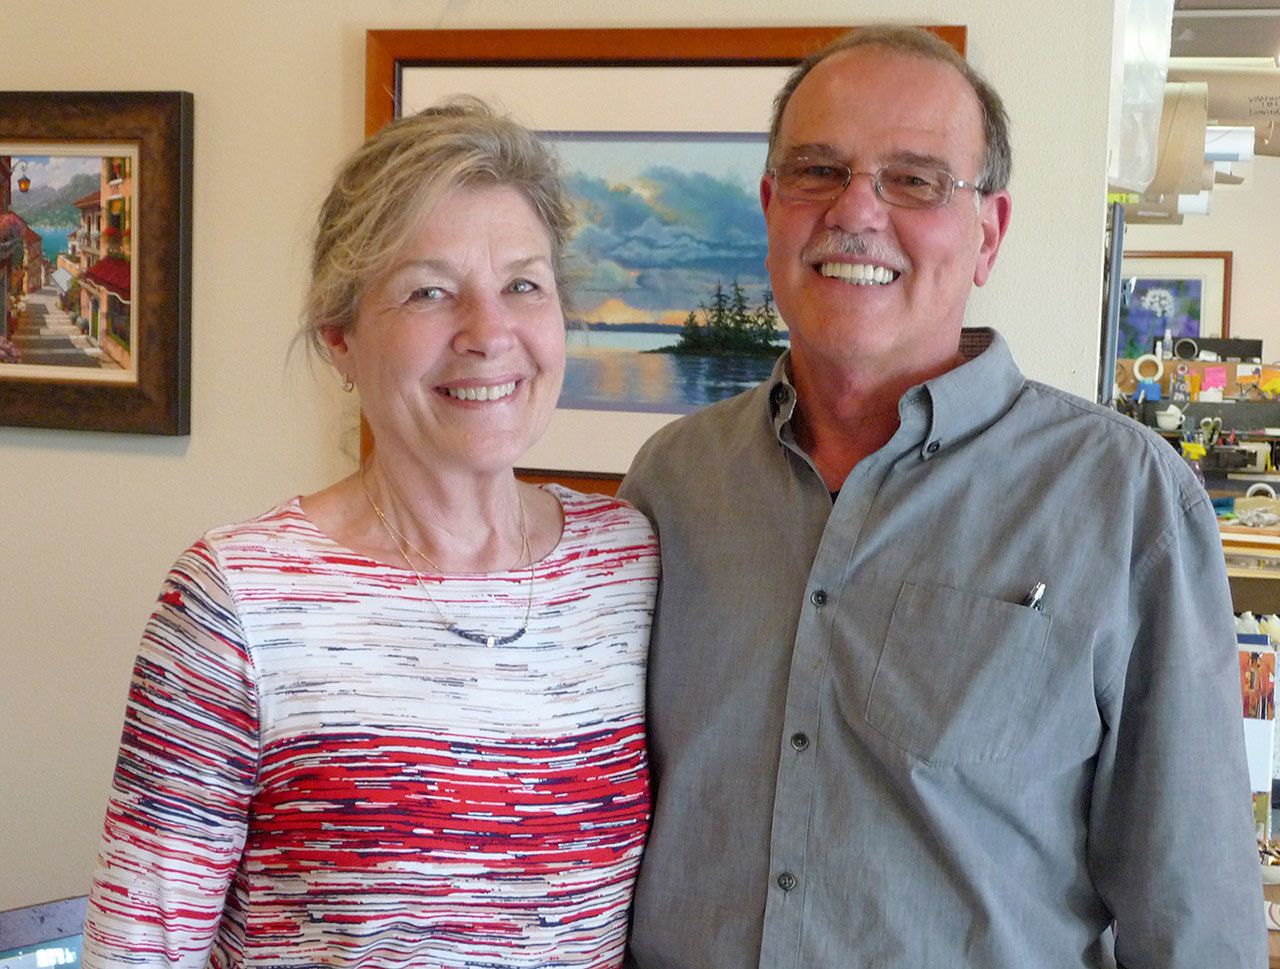 Jaymee and Don Peck are retiring and closing their business Creative Framing Prints Etc. on Nov. 30. Sequim Gazette photo by Patricia Morrison Coate